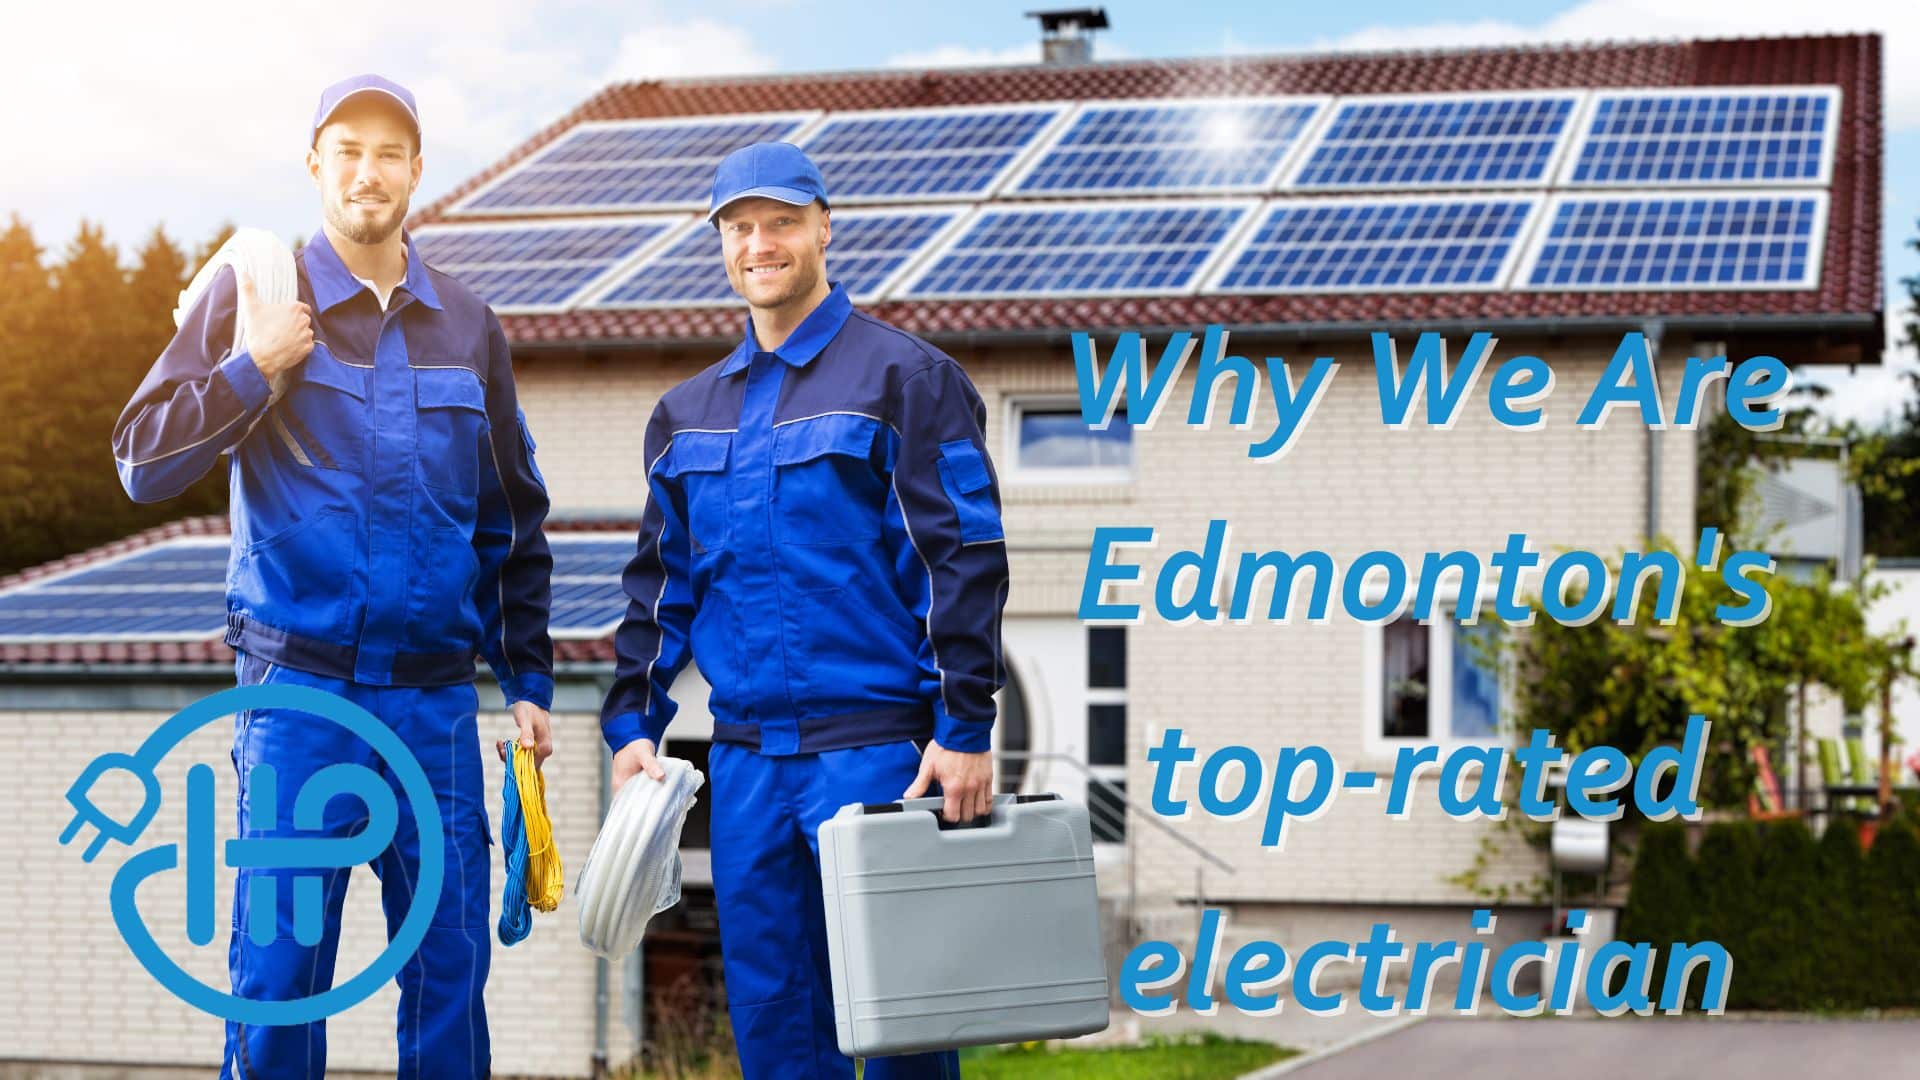 Edmonton's top-rated electrician